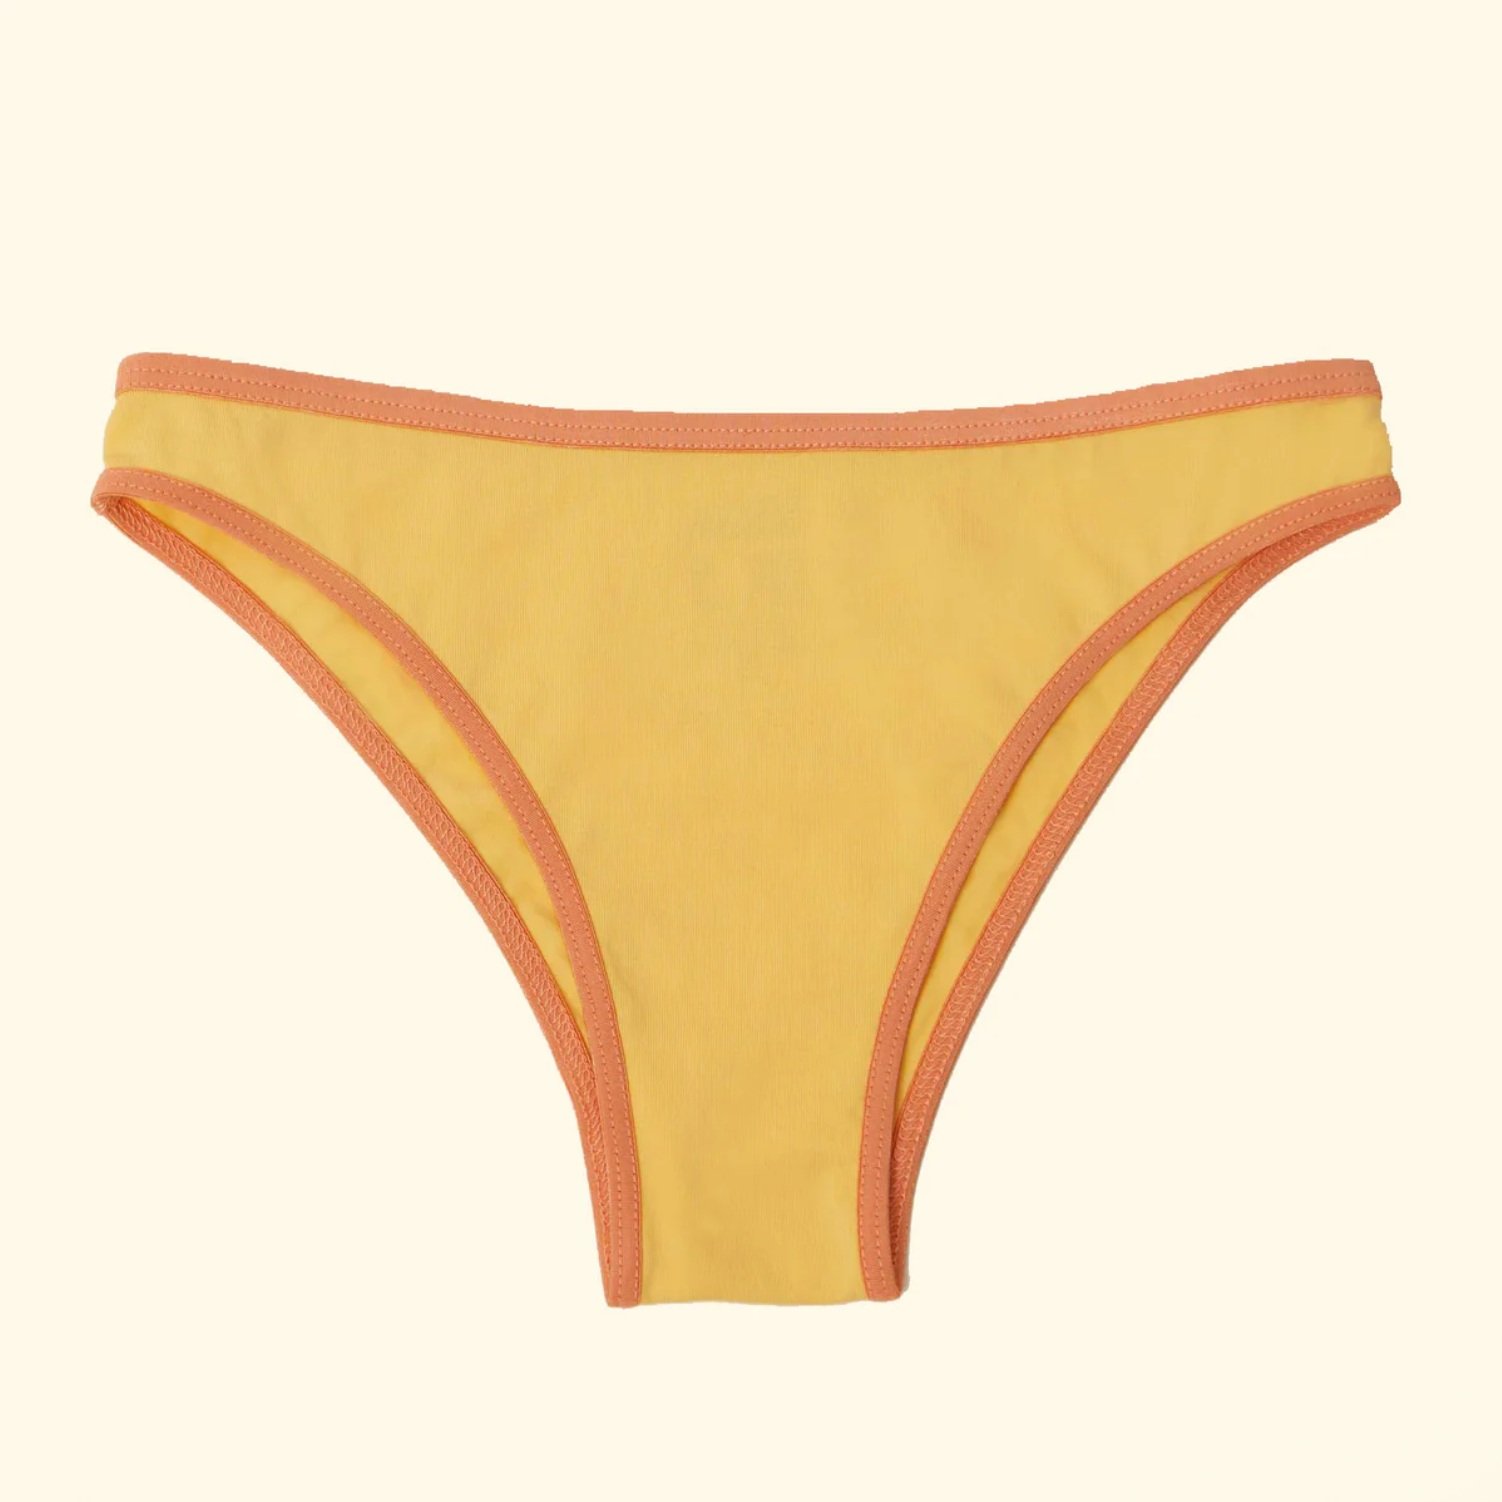 Underwear color meaning Blue-Wellness, Tranquility Yellow